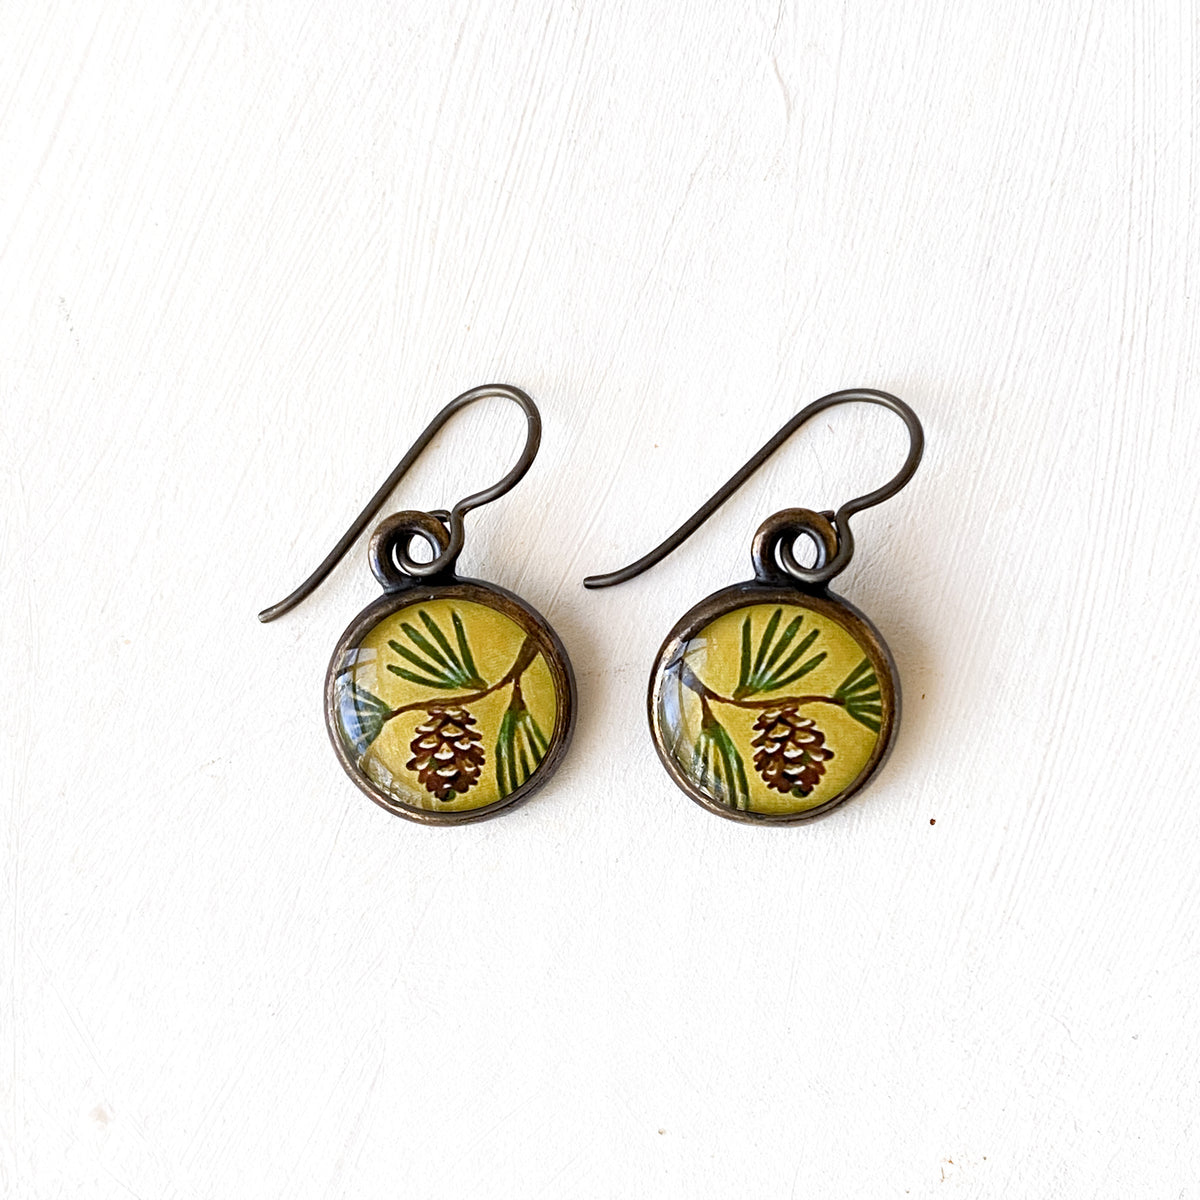 a pair of earrings with a picture of a pine on it